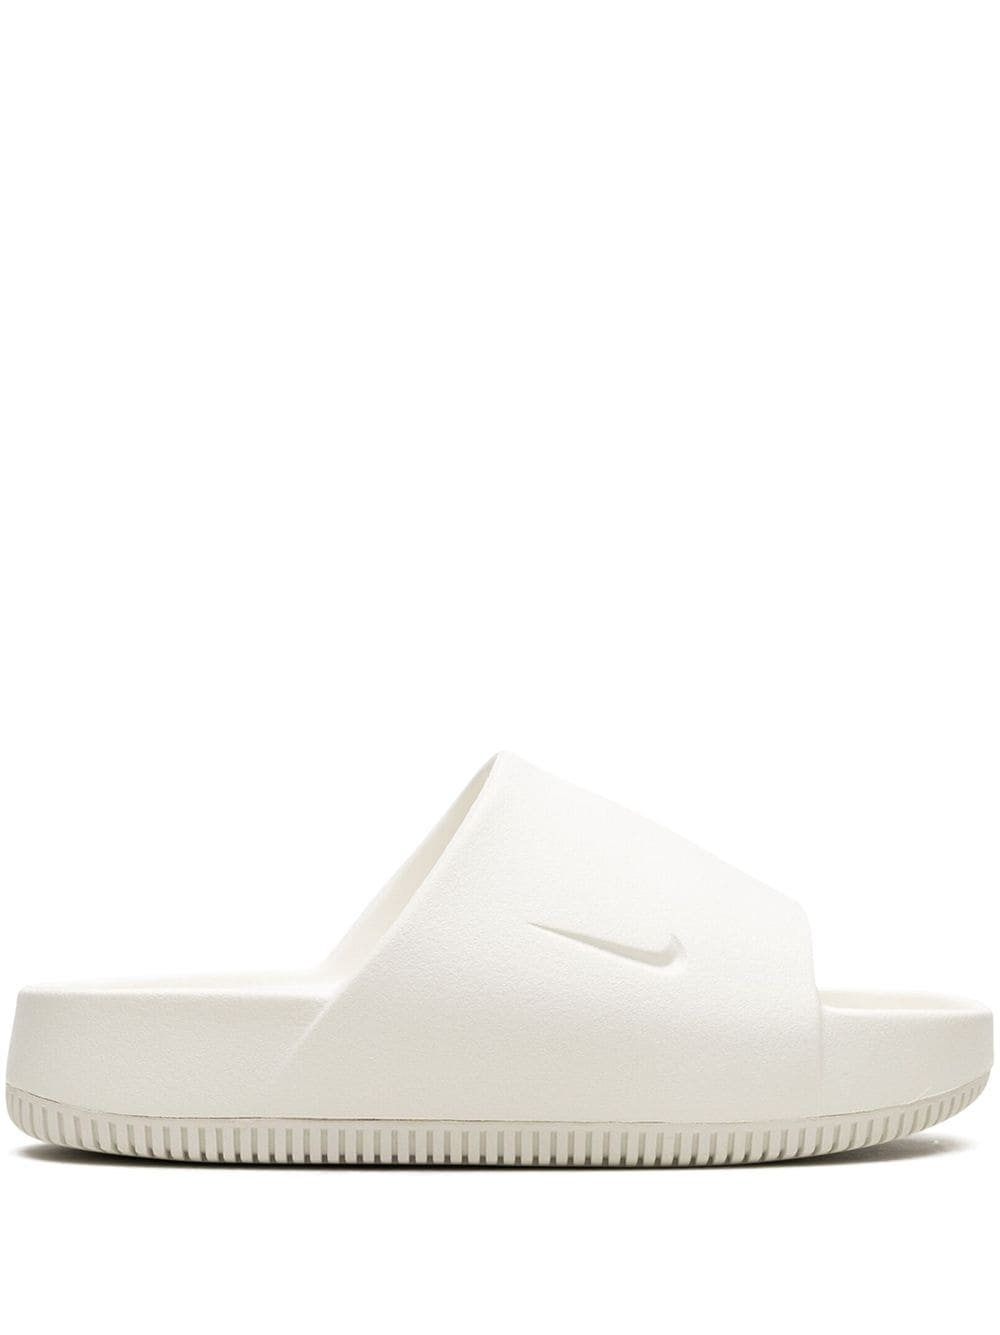 Image 1 of Nike "Calm ""Sail"" slippers"